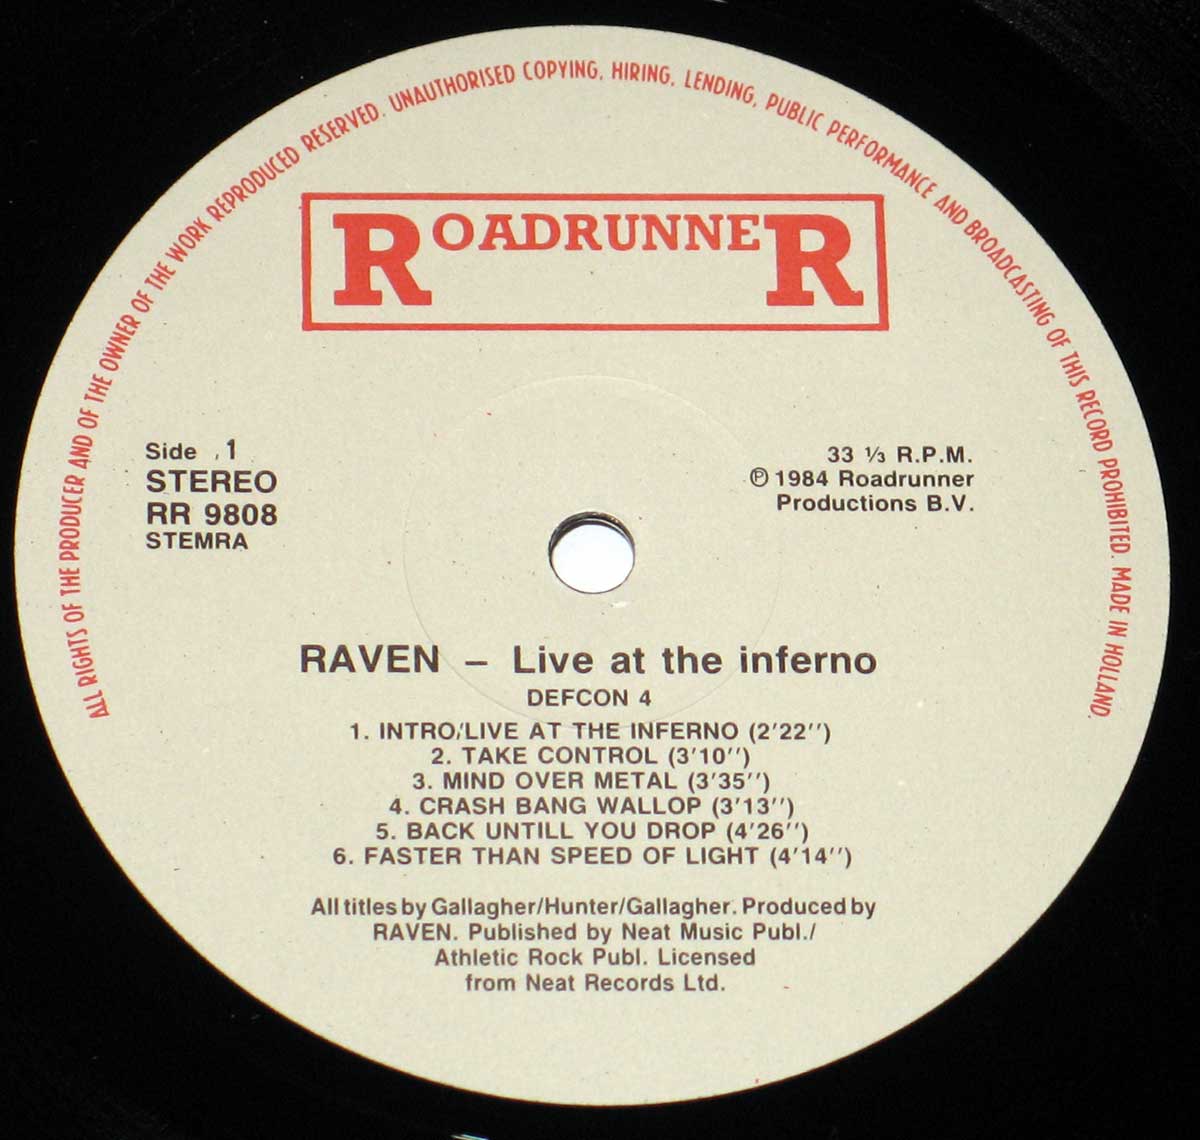 Enlarged High Resolution Photo of the Record's label RAVEN - Live at the Inferno https://vinyl-records.nl